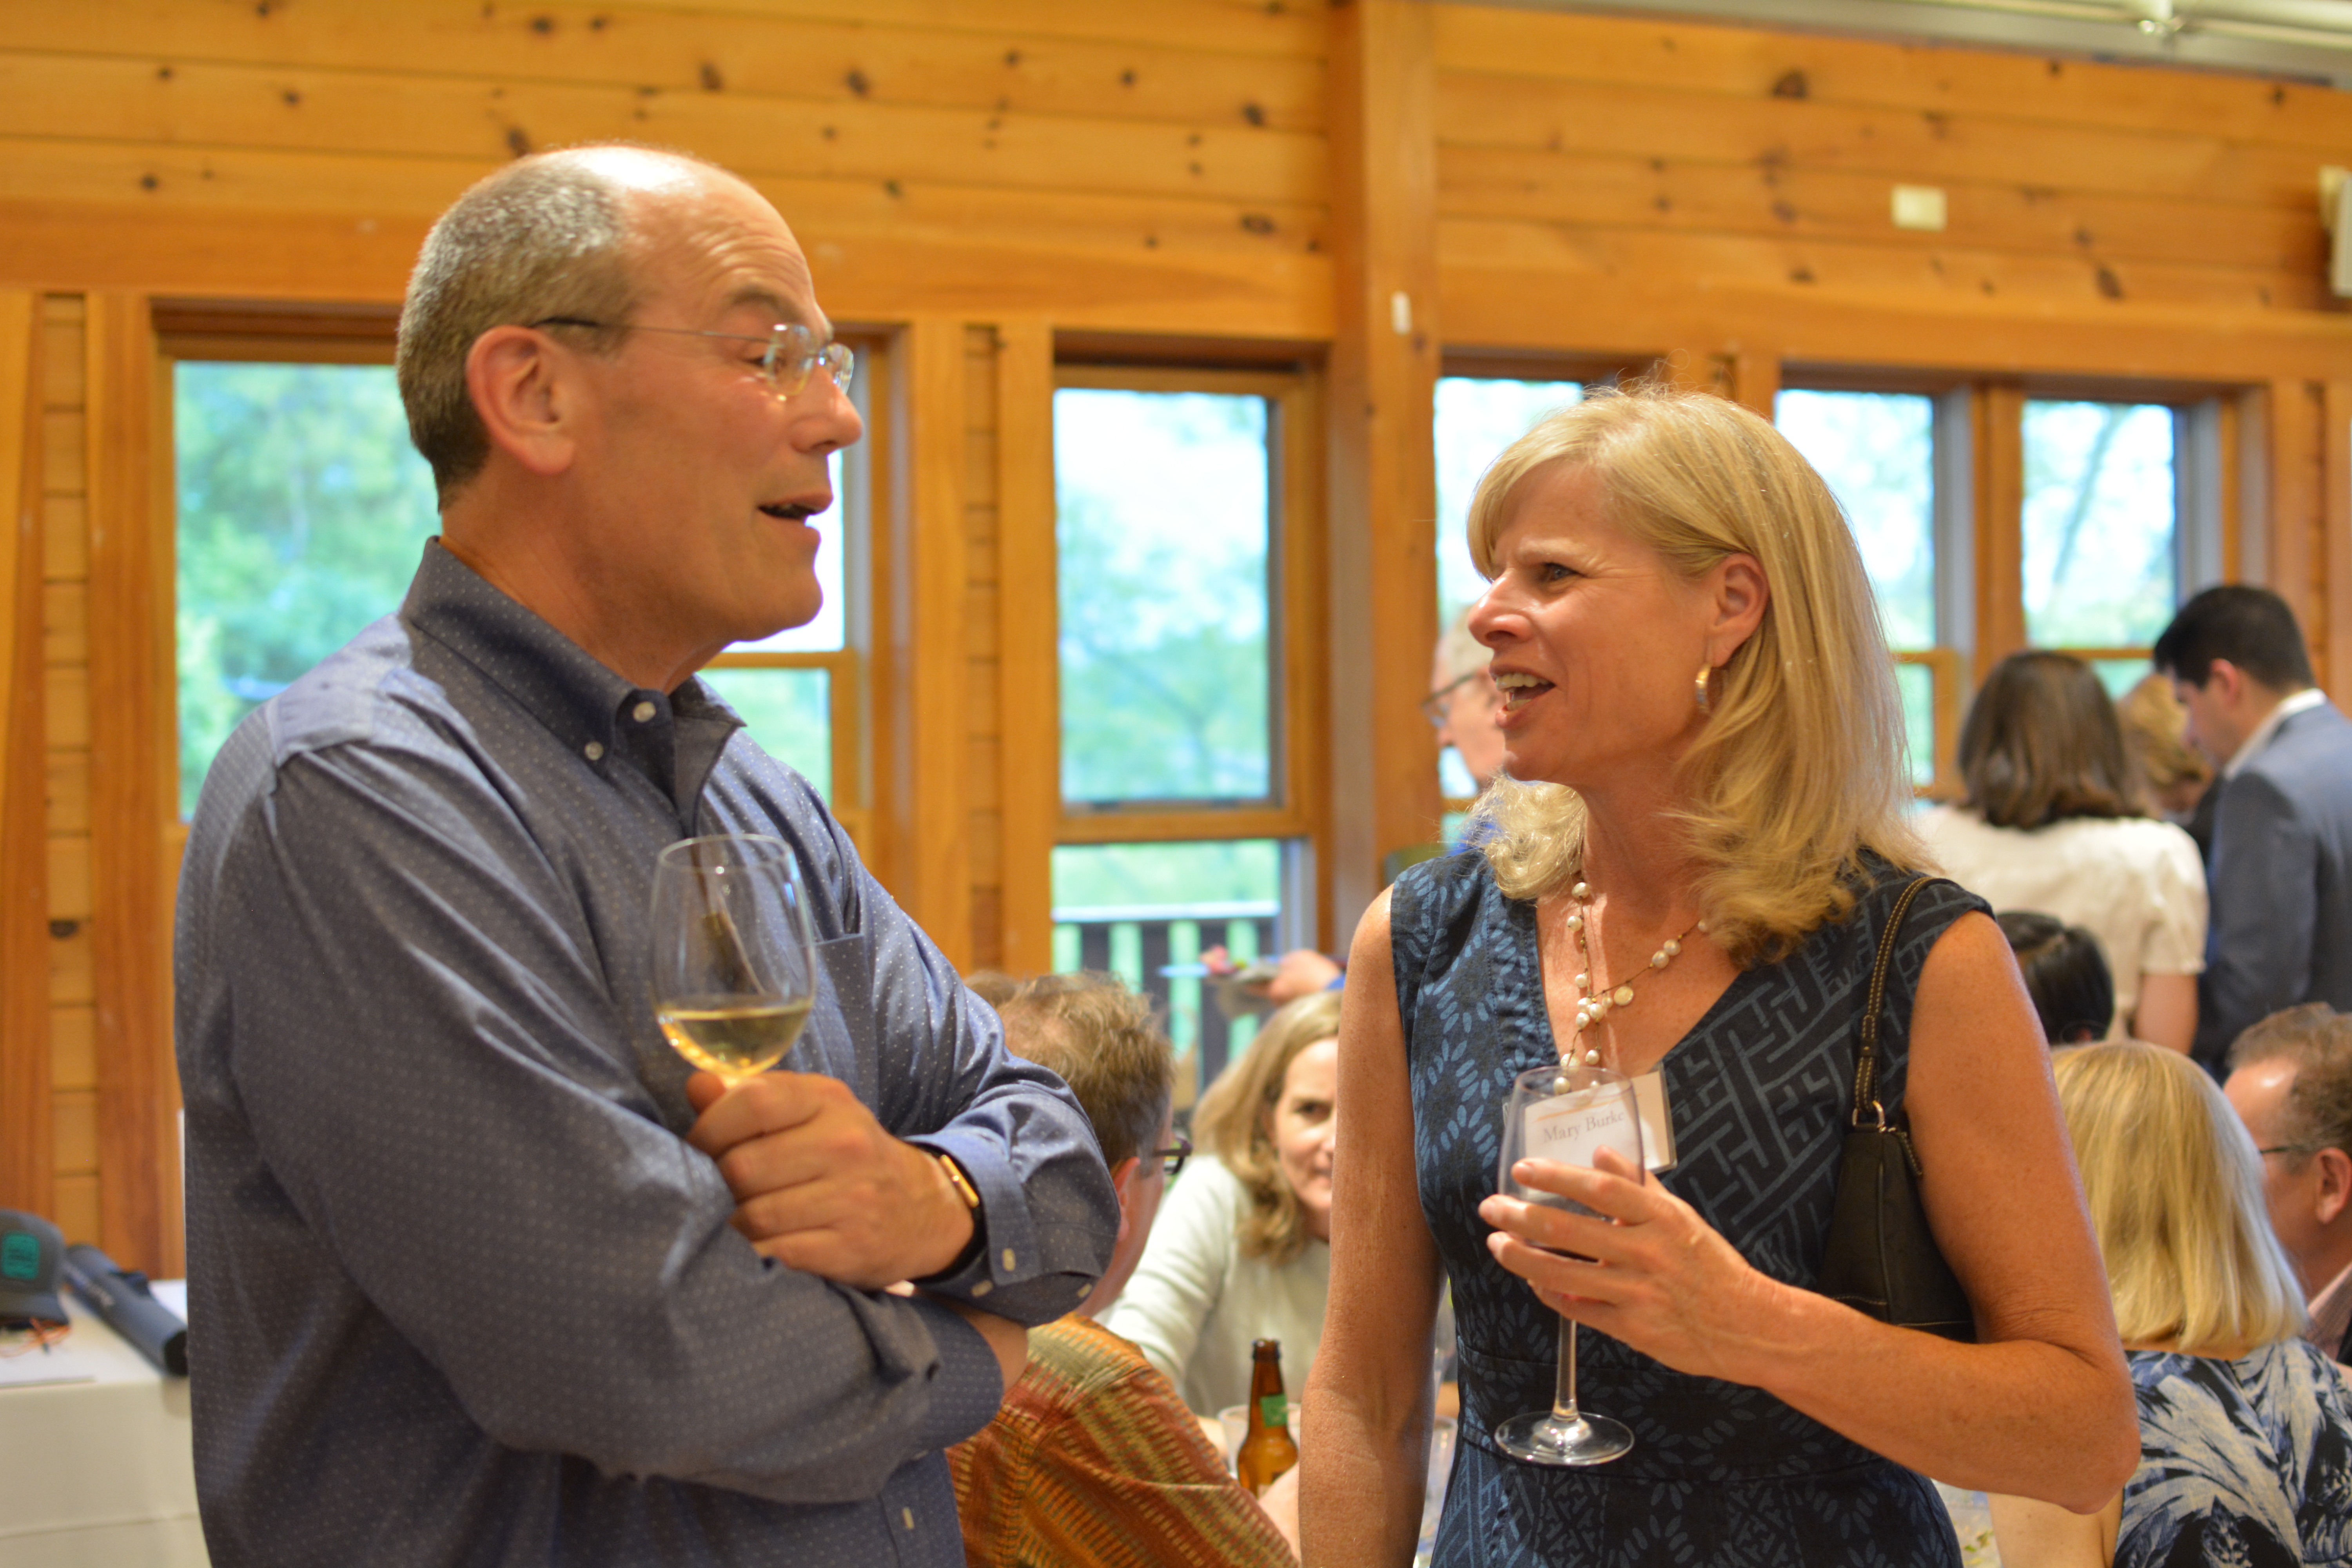 Mary Burke speaks with a fellow UEC Patron at the Summer Solstice Soiree